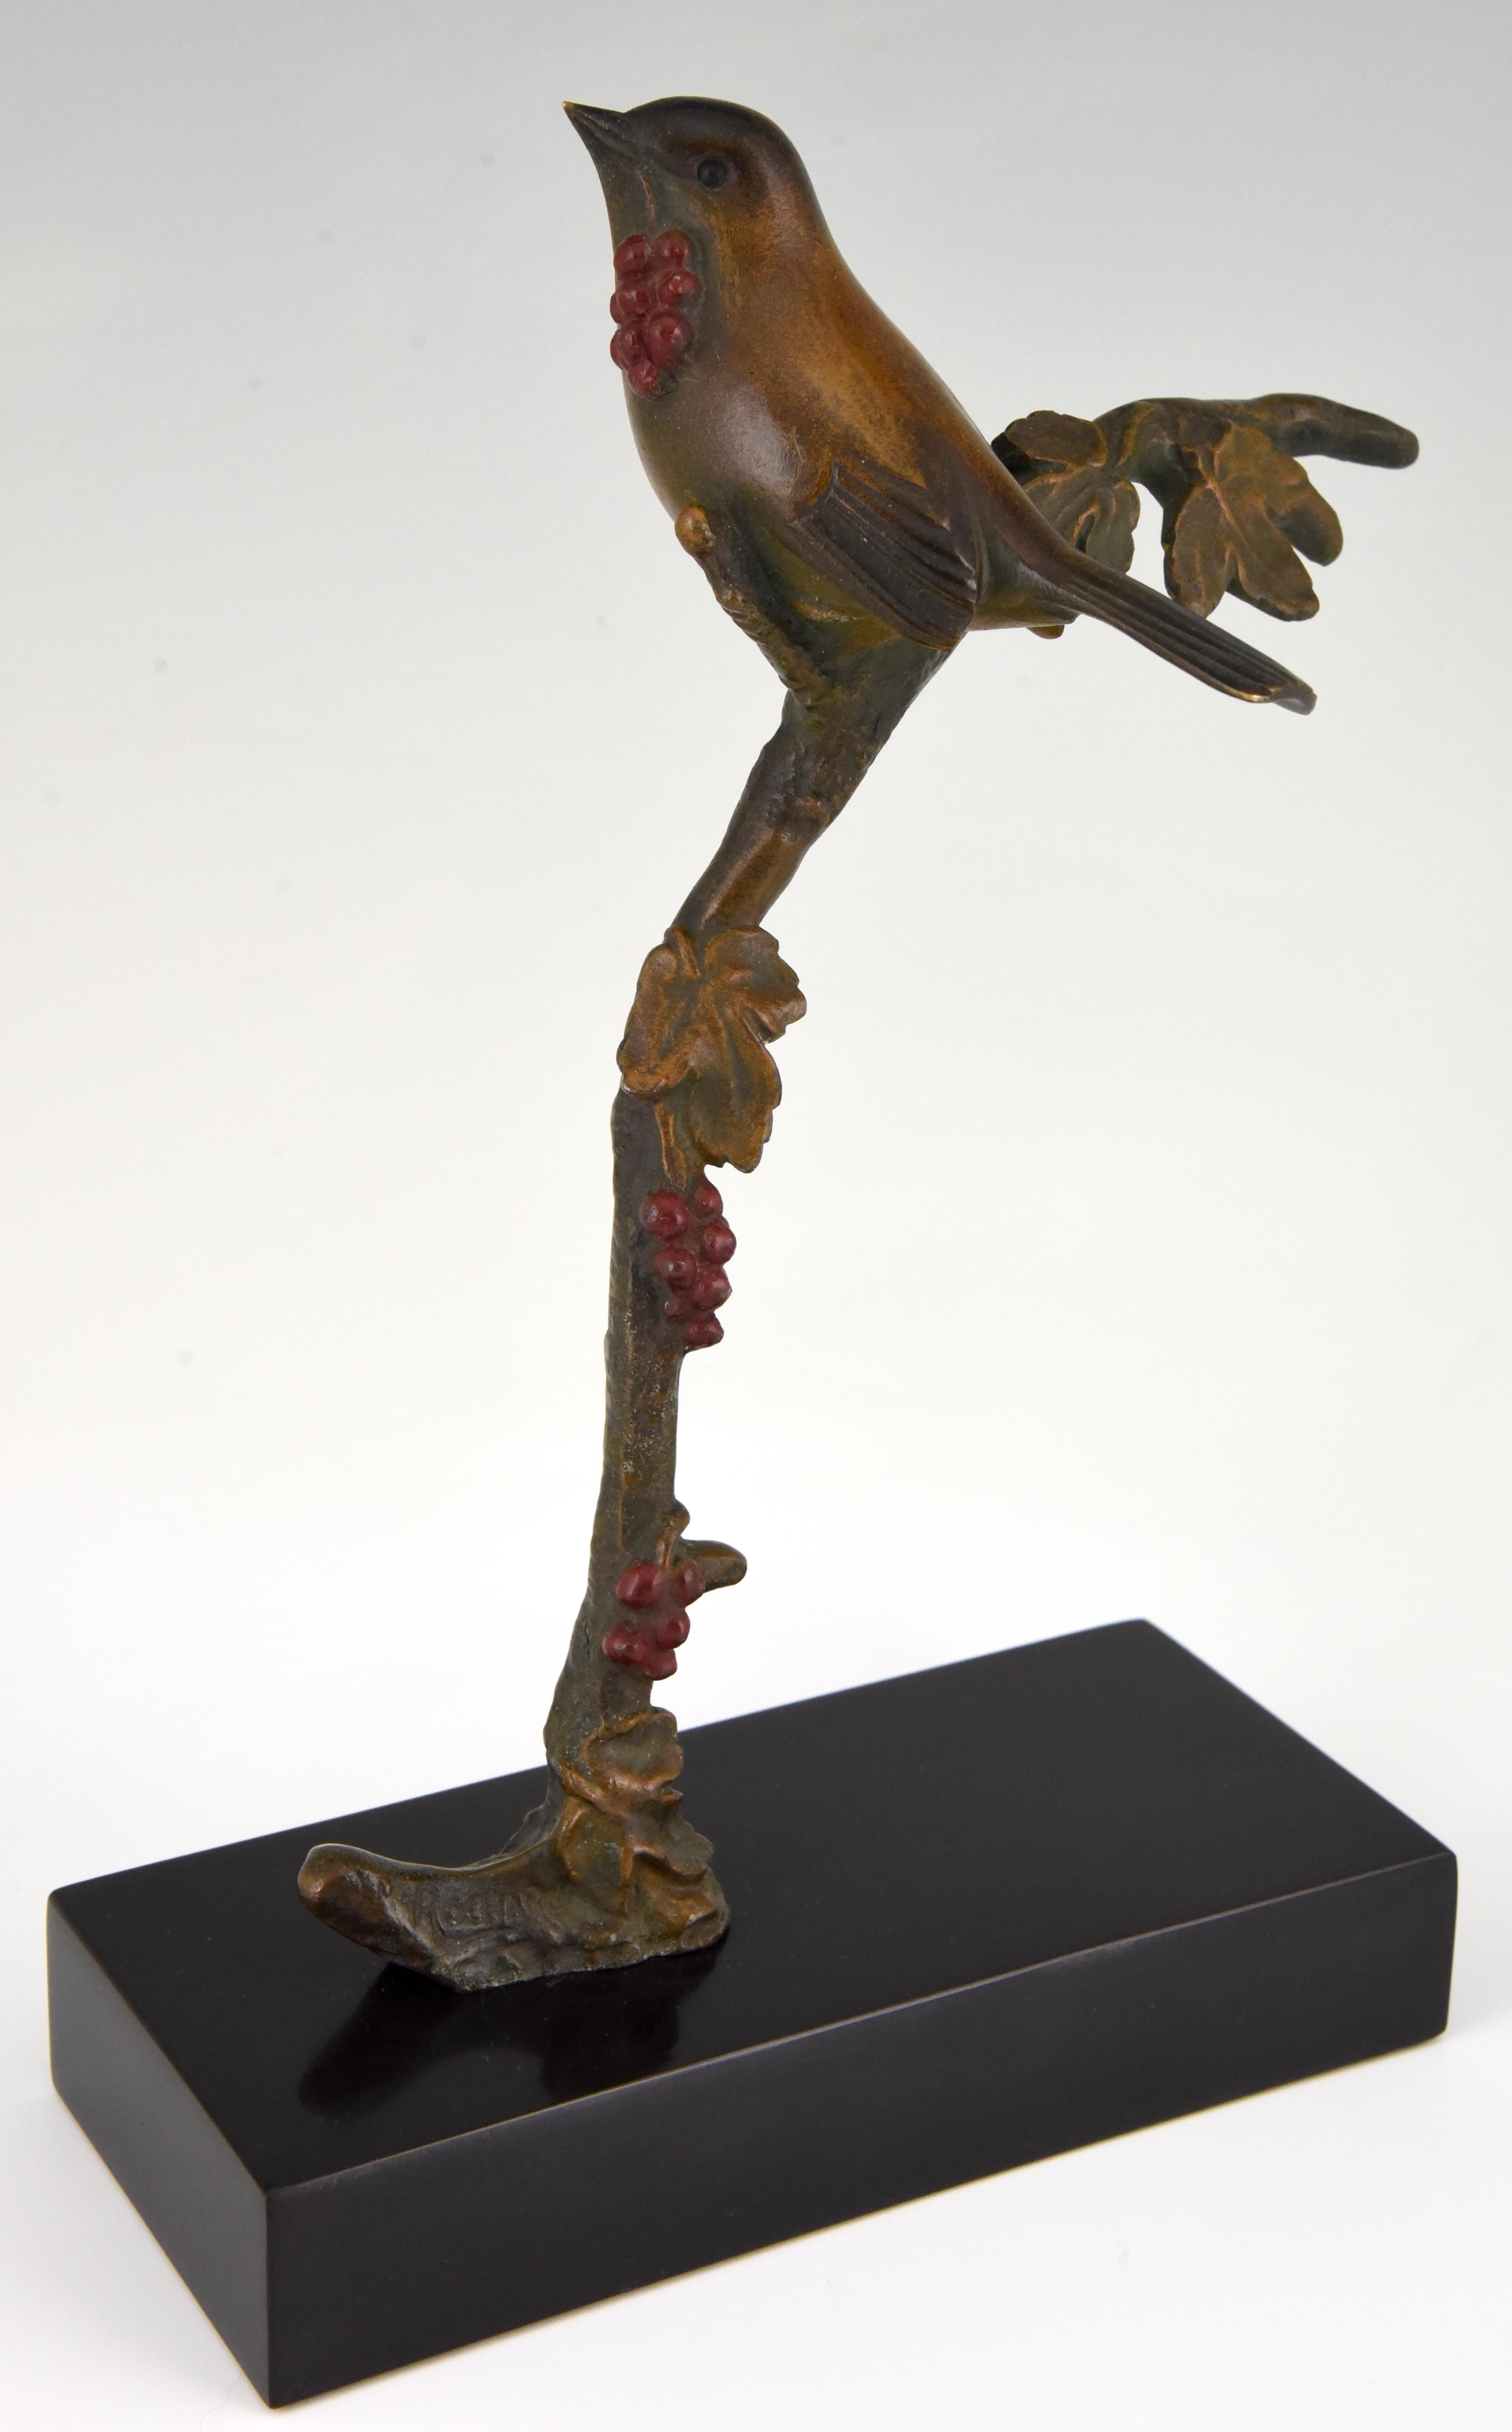 Lovely bronze sculpture of a bird on a branch with berries signed by the French artist Irénée Rochard. The sculpture has a beautiful multi-color patina and stands on a Belgian black marble base. France, 1930.
Literature:
“Animals in bronze” by